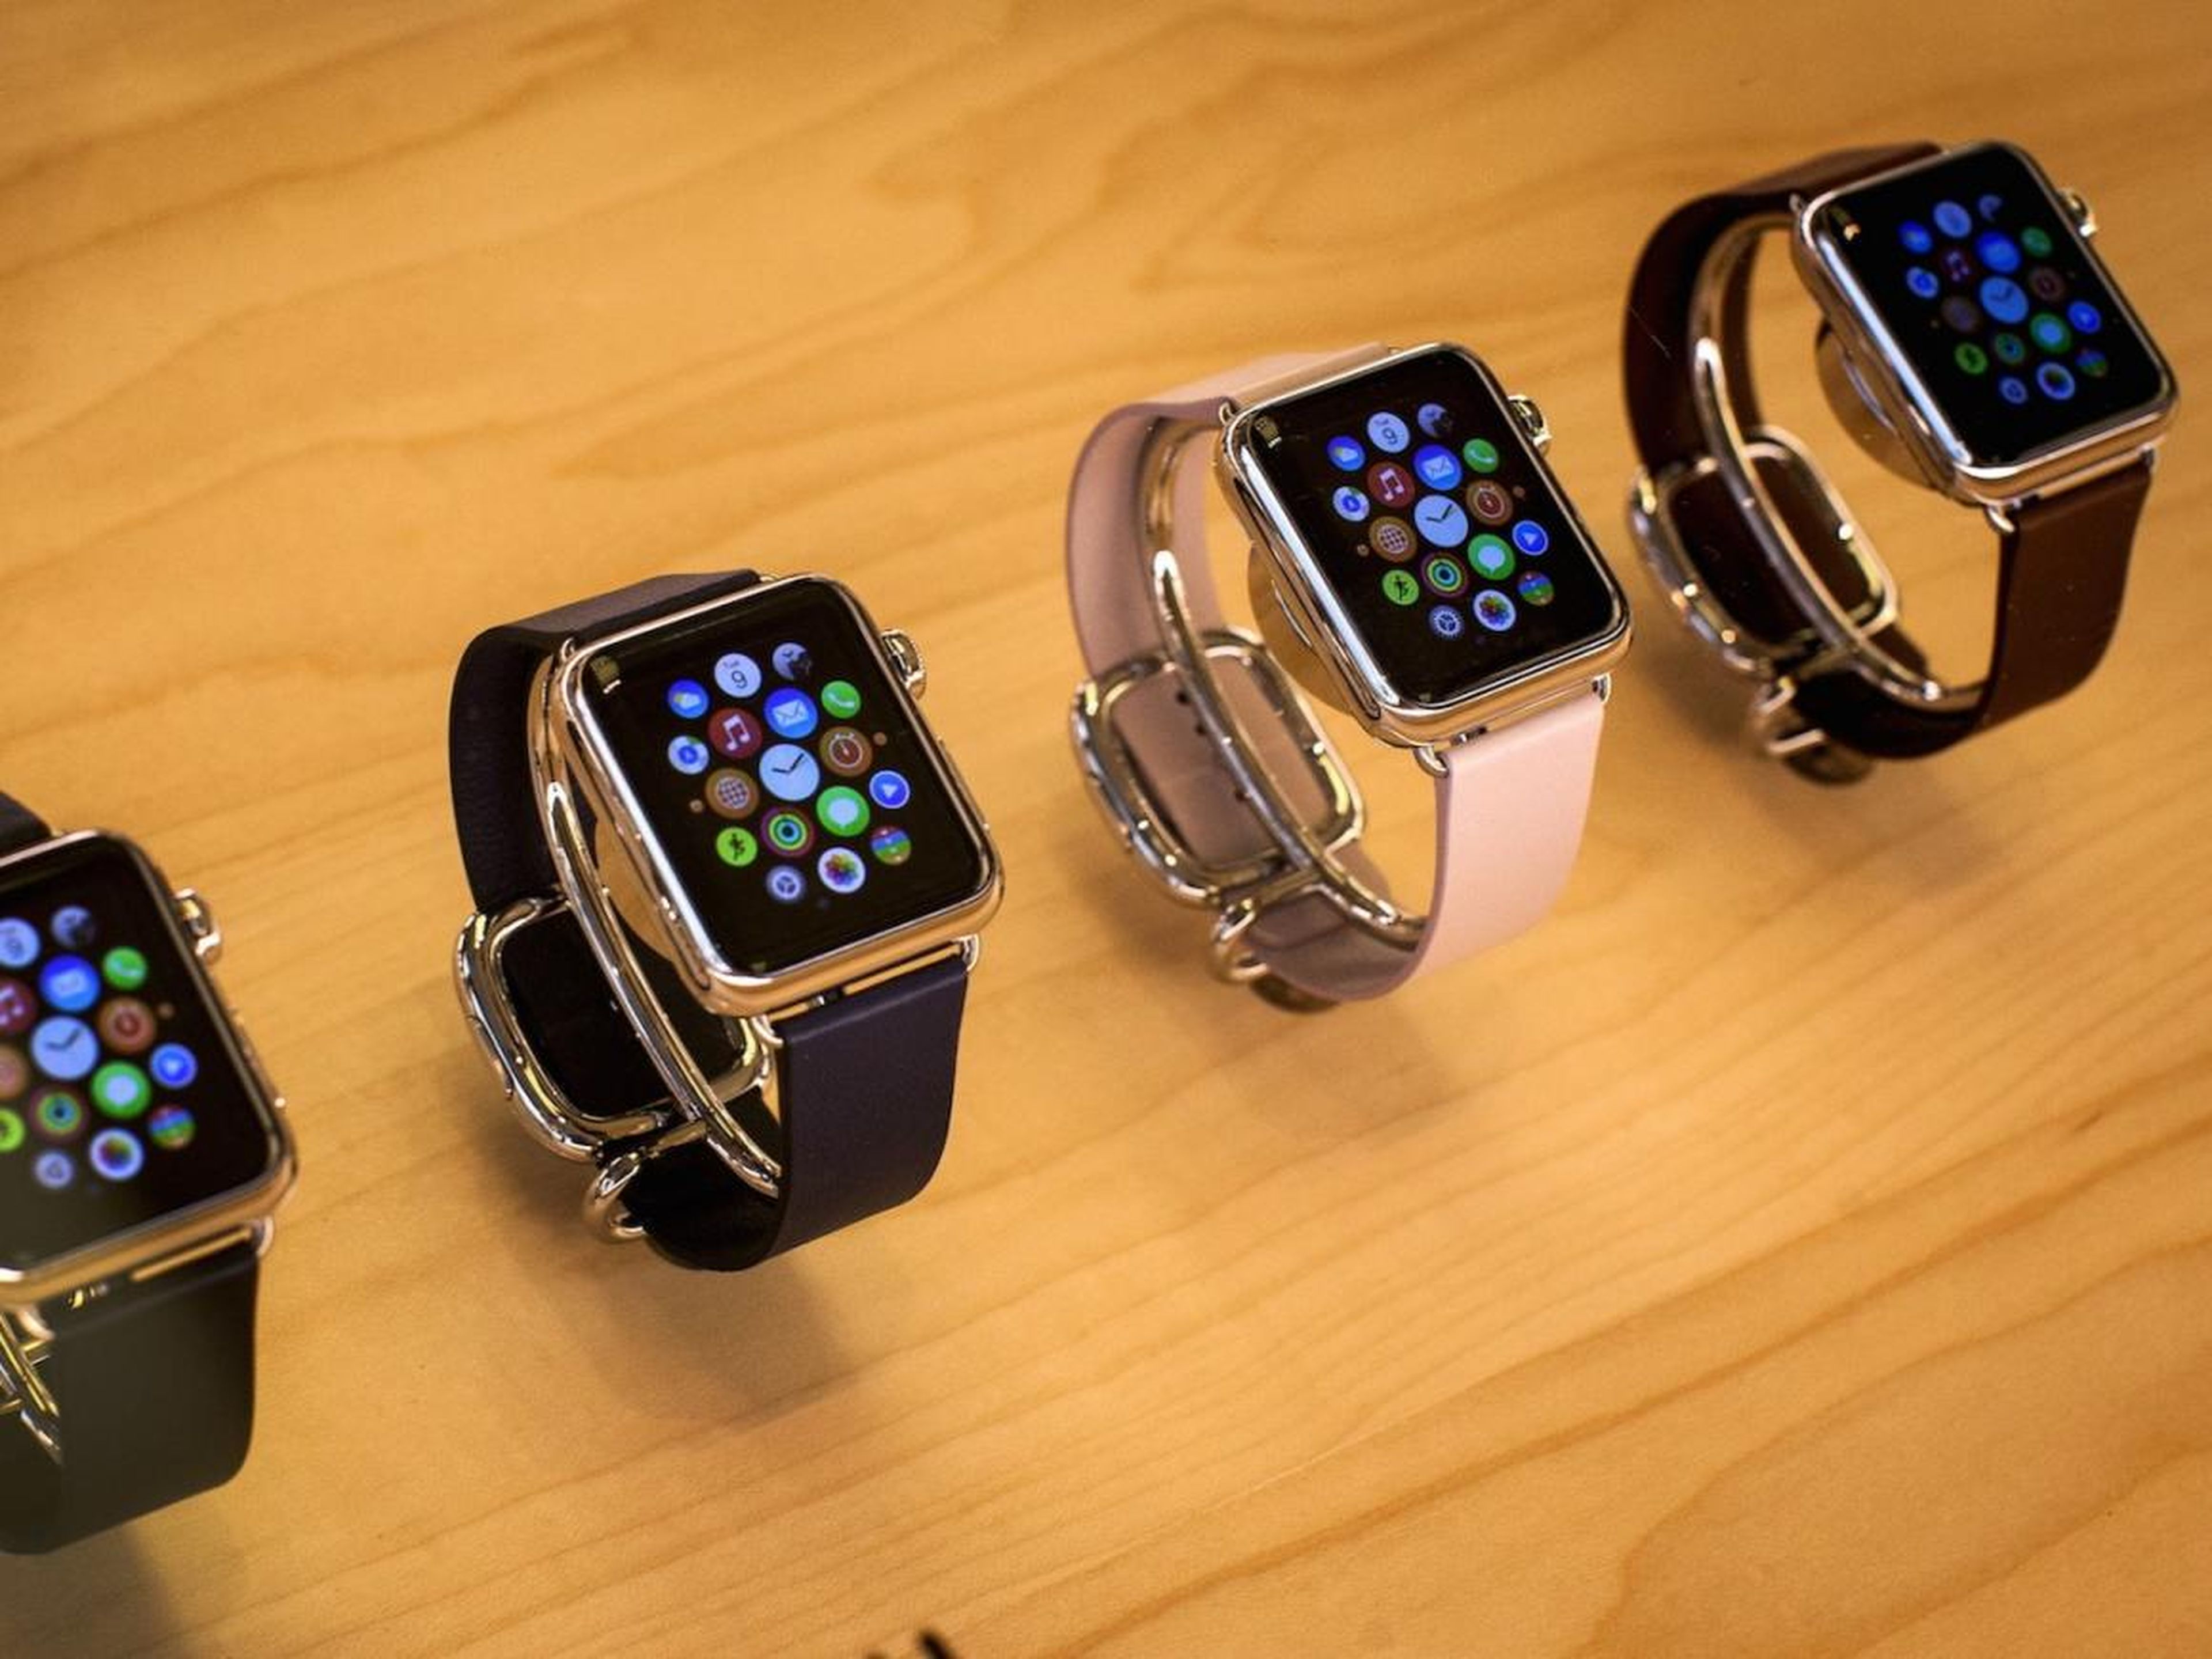 There are now many versions of the watch.